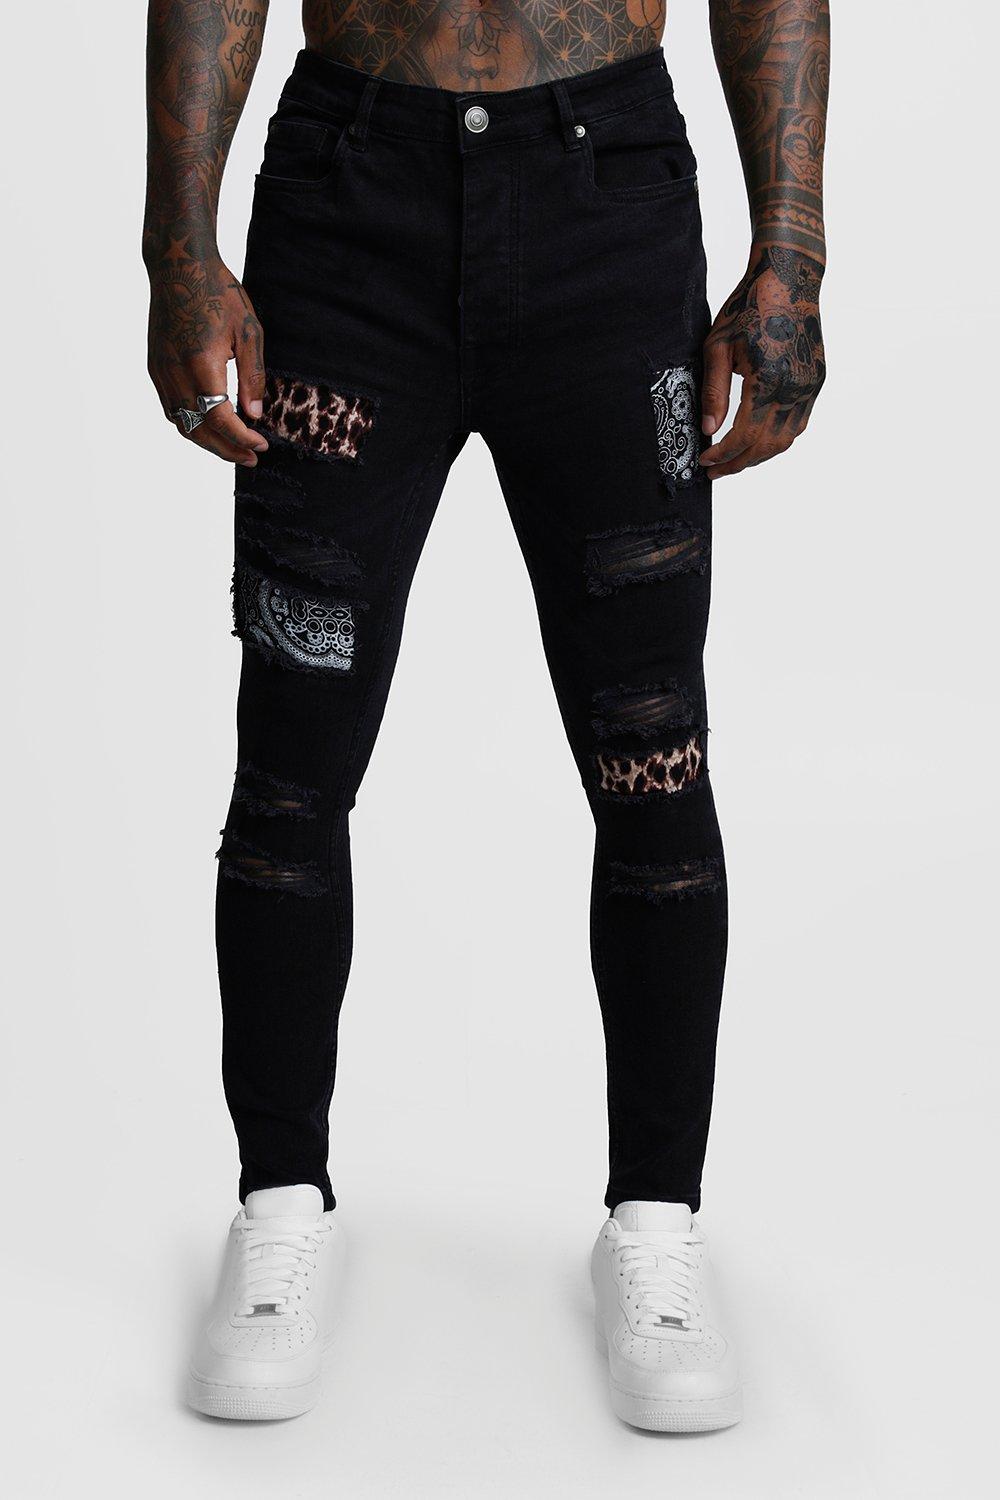 ripped jeans with black patches